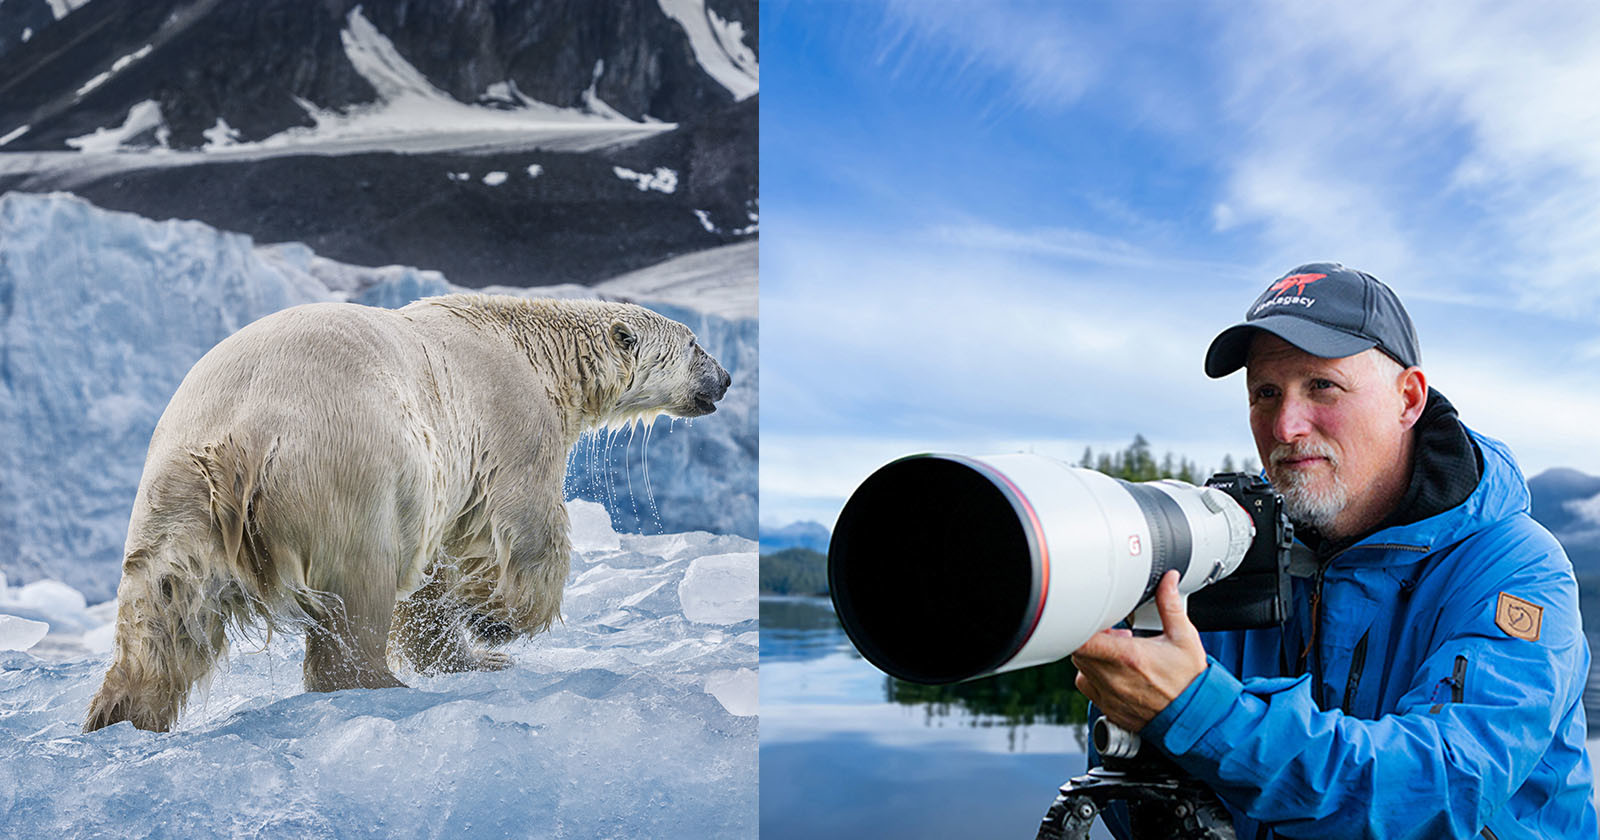 Paul Nicklen: Using Photography for Conservation